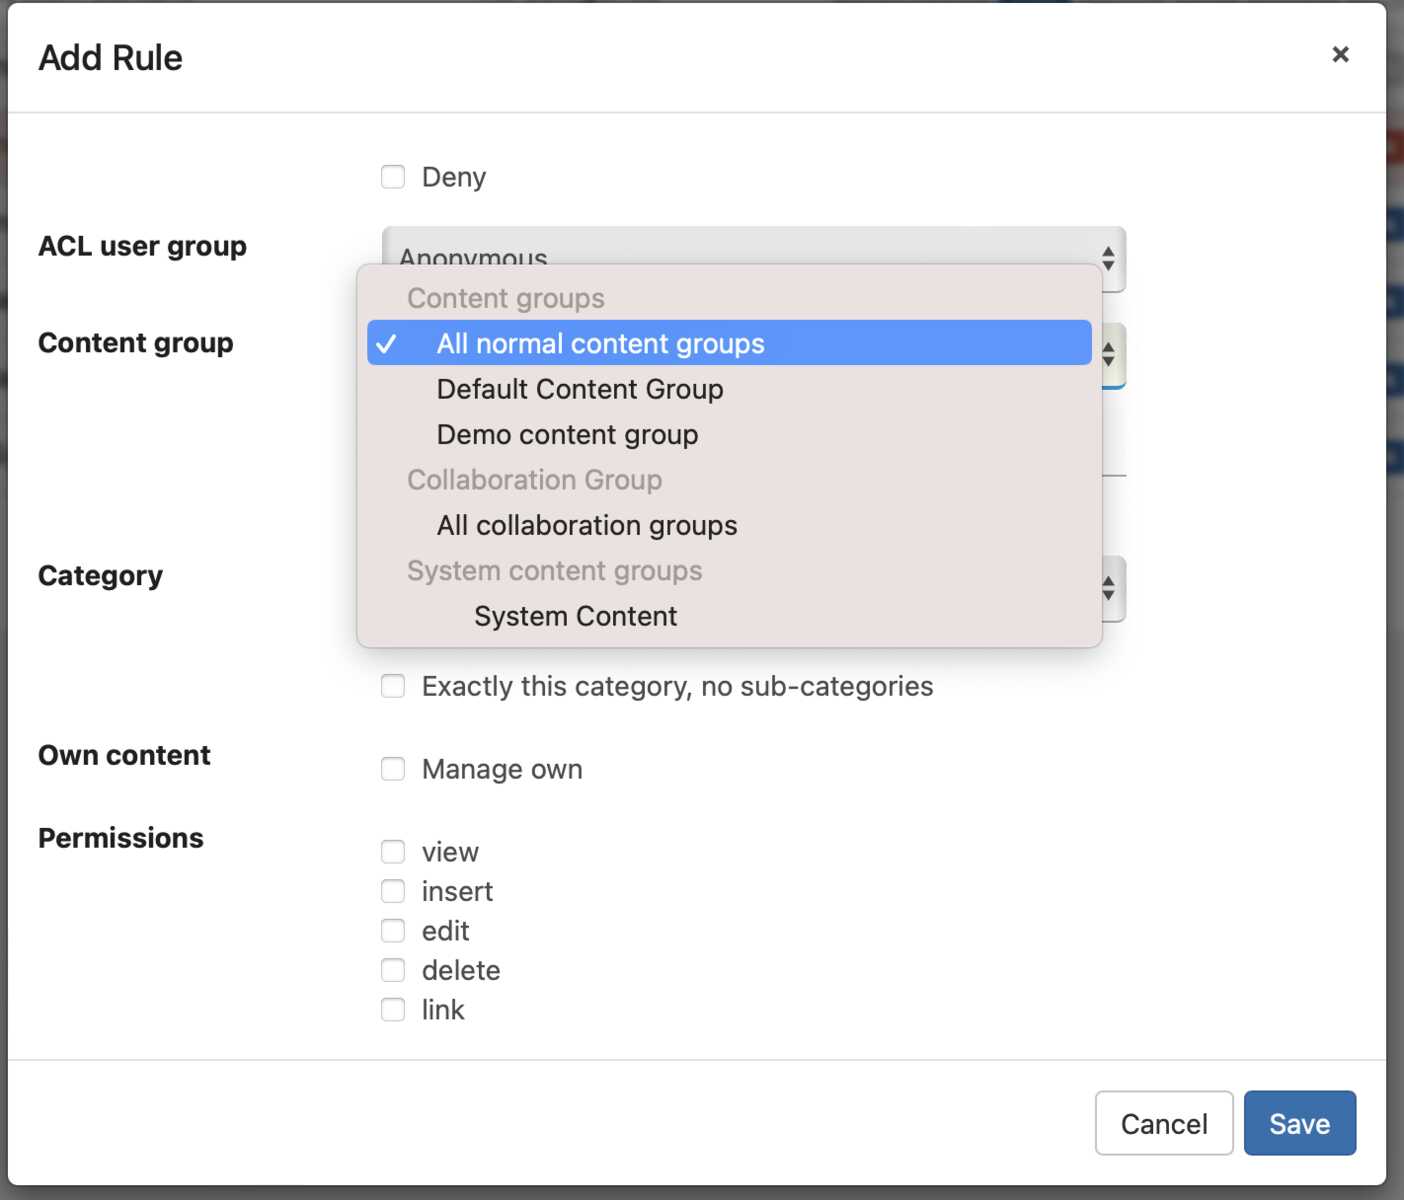 Selecting all collaboration groups